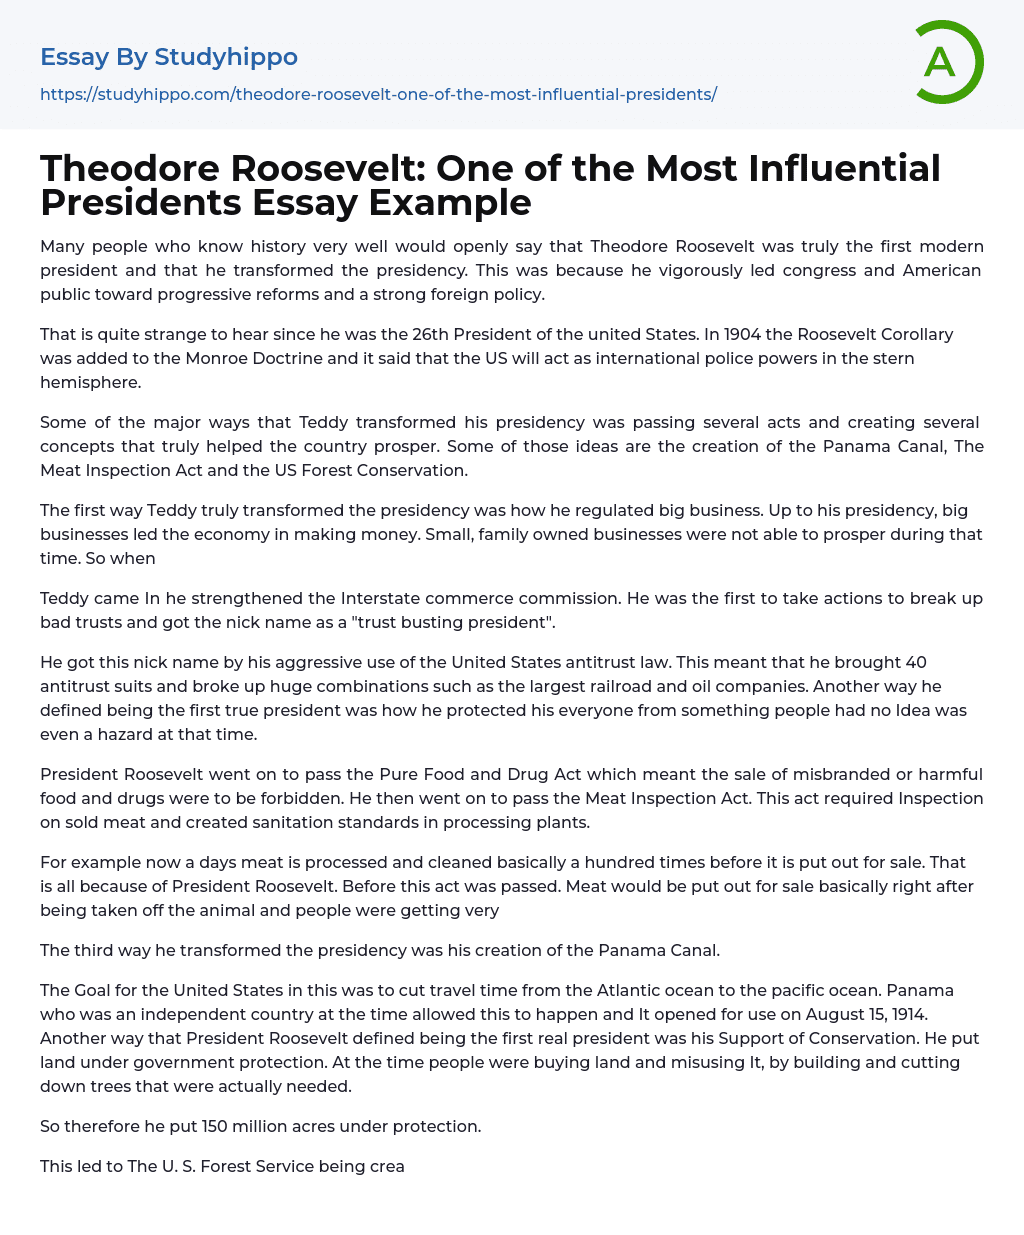 Theodore Roosevelt: One of the Most Influential Presidents Essay Example